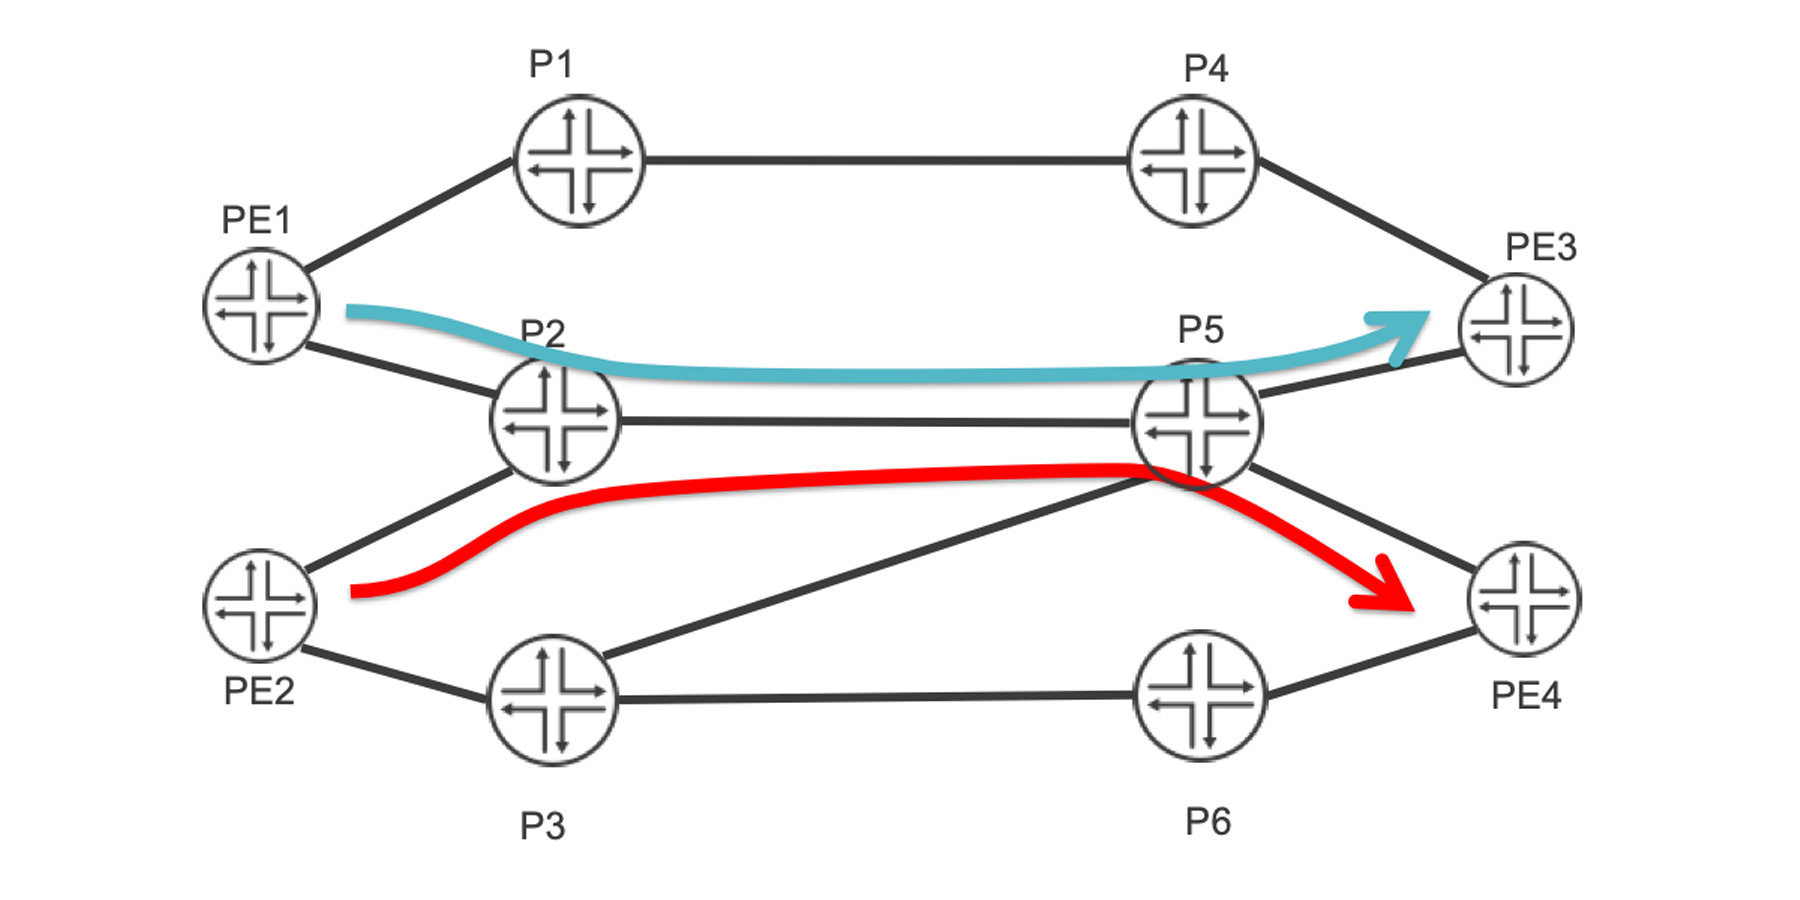 Path Diversity with Segment Routing (SR) and the Paragon Pathfinder Controller